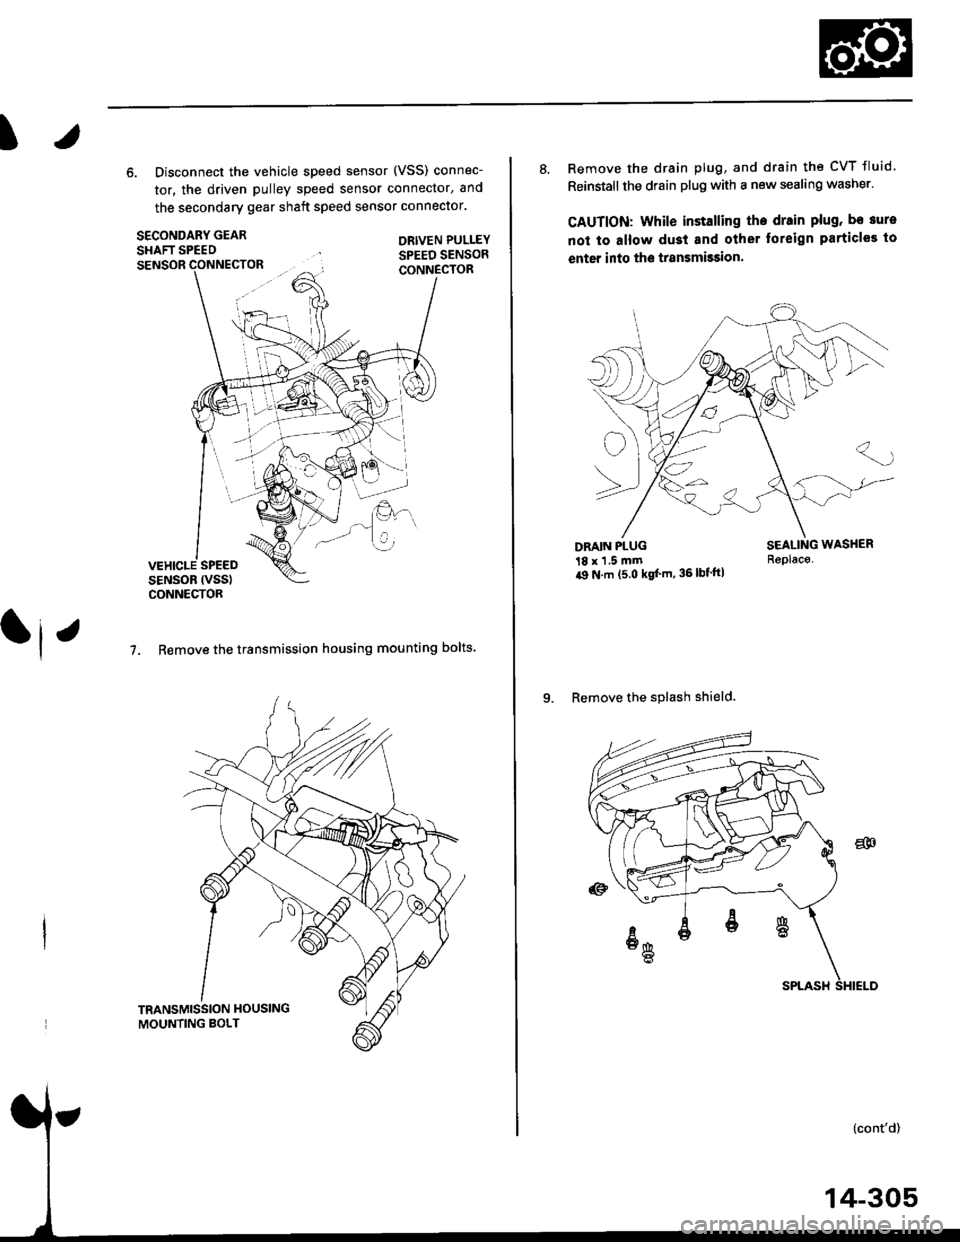 HONDA CIVIC 2000 6.G User Guide I
6. Disconnect the vehicle speed sensor (VSS) connec-
tor, the driven pulley speed sensor connector, and
the secondary gear shaft speed sensor connector.
SECONDARY GEARSHAFT SPEEDORIVEN PULLEY
SPEED 